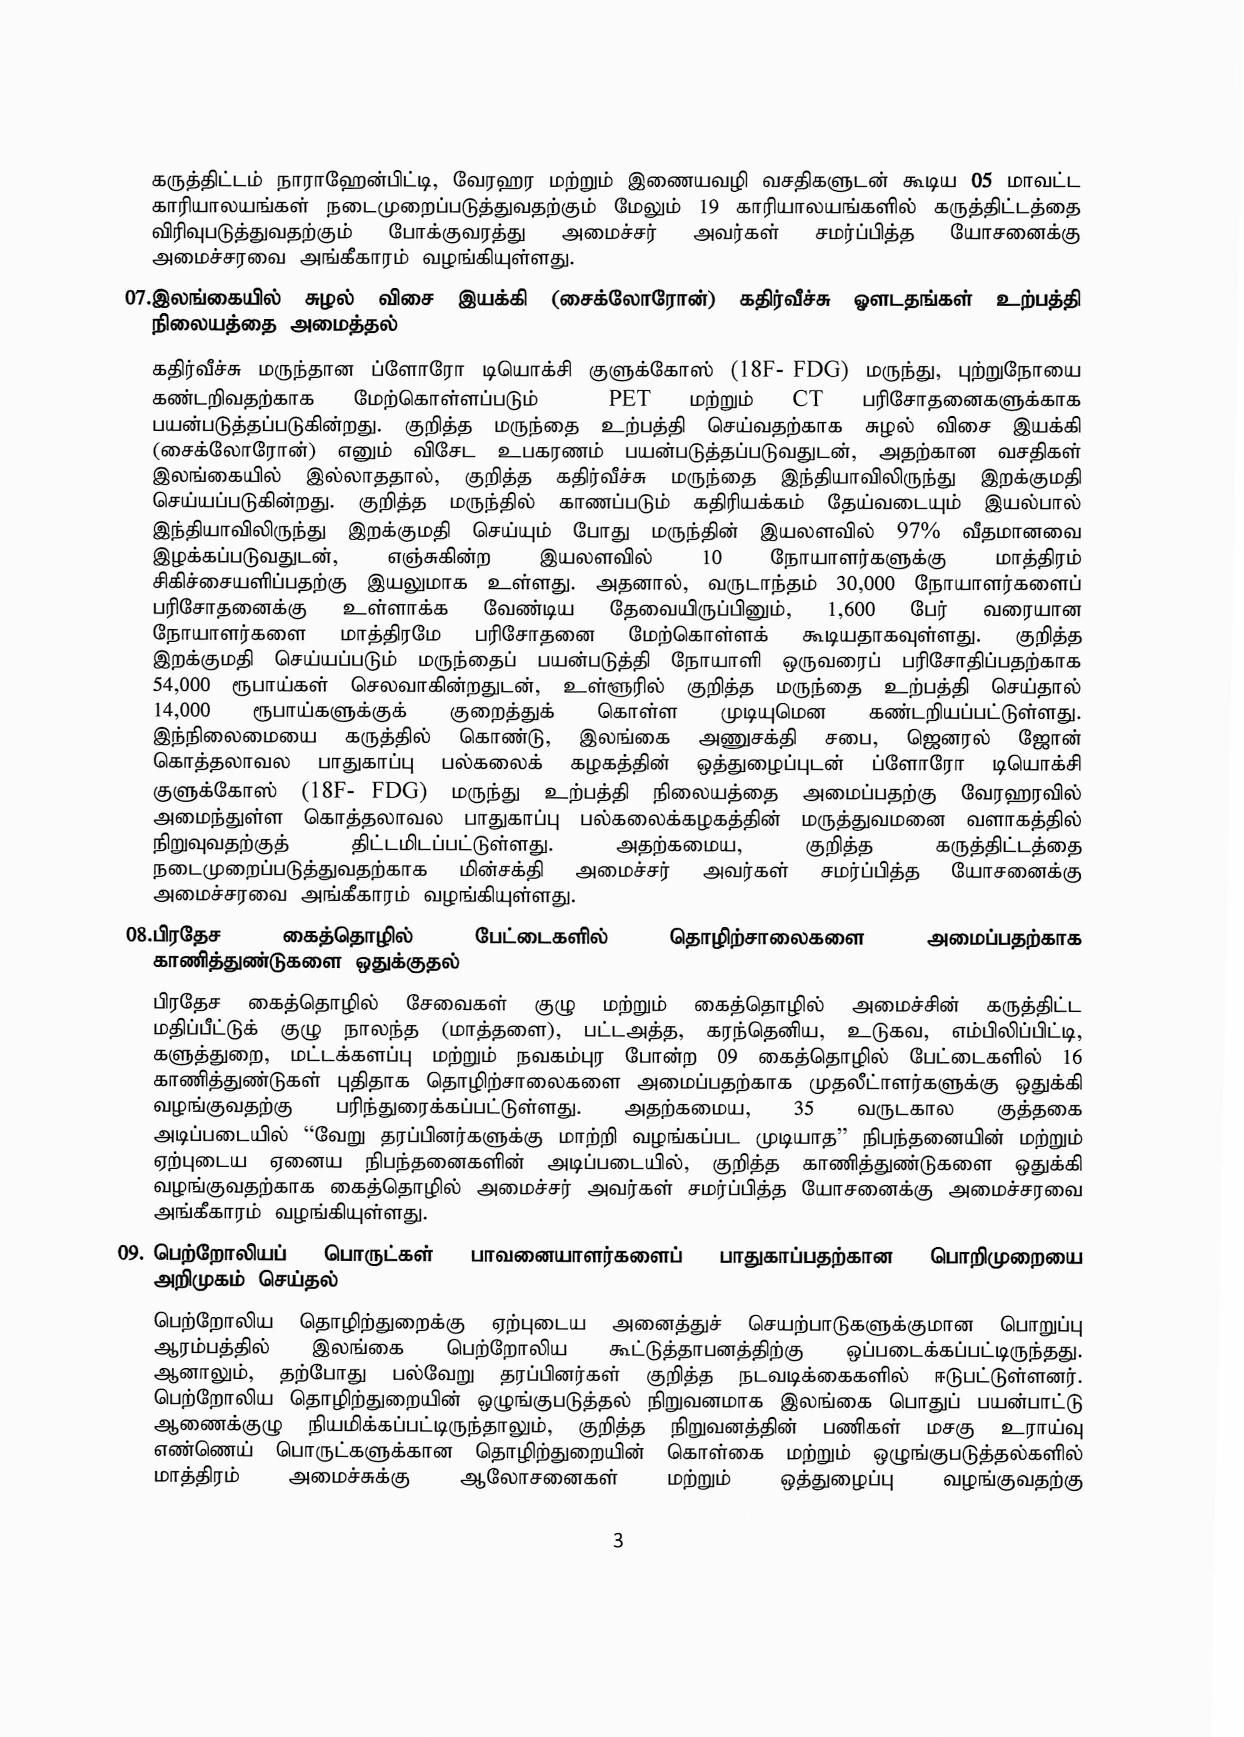 Cabinet Decision on 29.03.2021 Tamil page 003